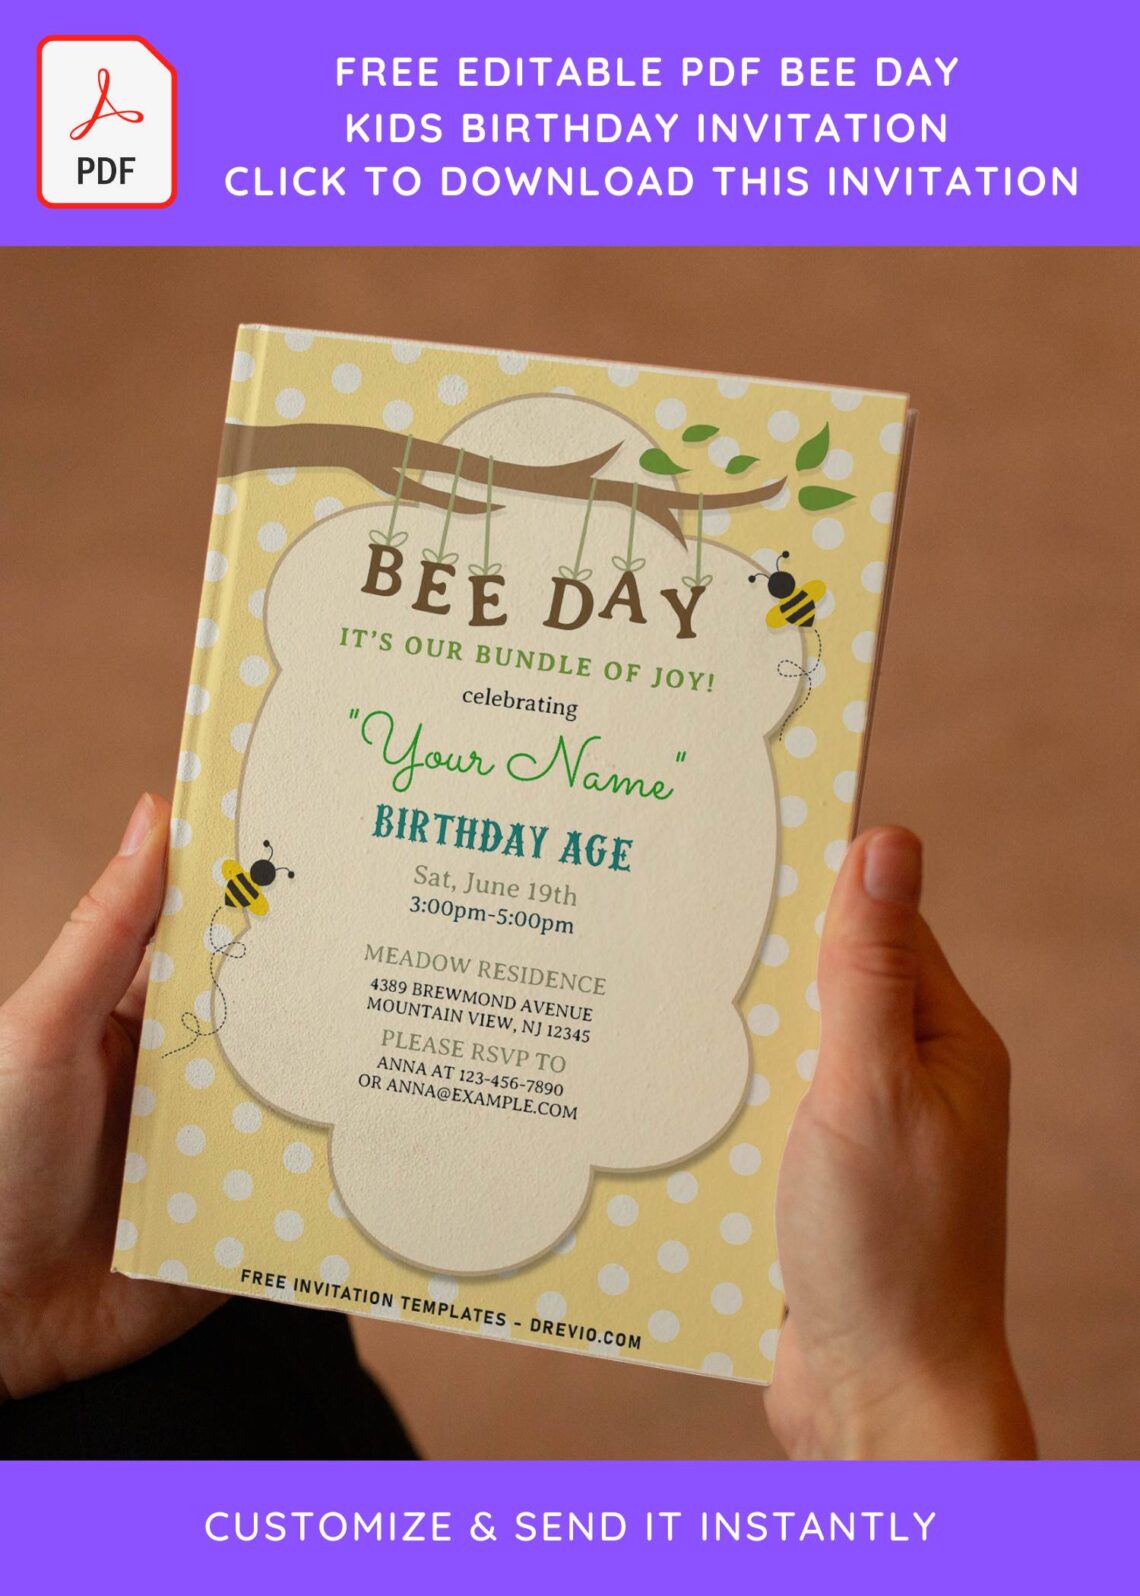 (Free Editable PDF) Happy Bee Day Birthday Invitation Templates with cute bees